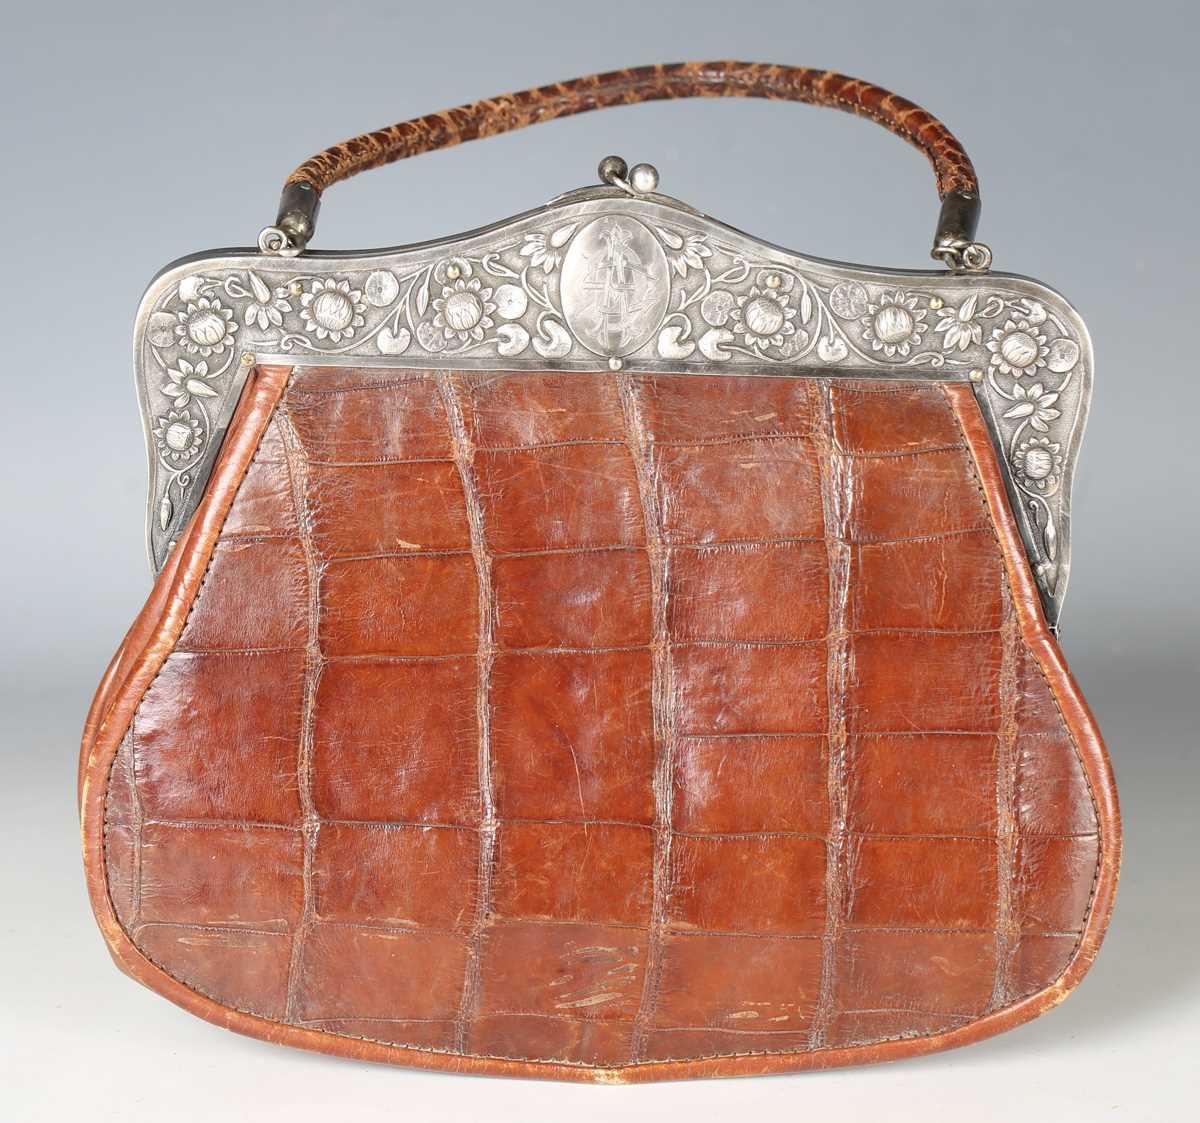 An early 20th century crocodile skin handbag, the white metal clasp decorated with lotus flowers and